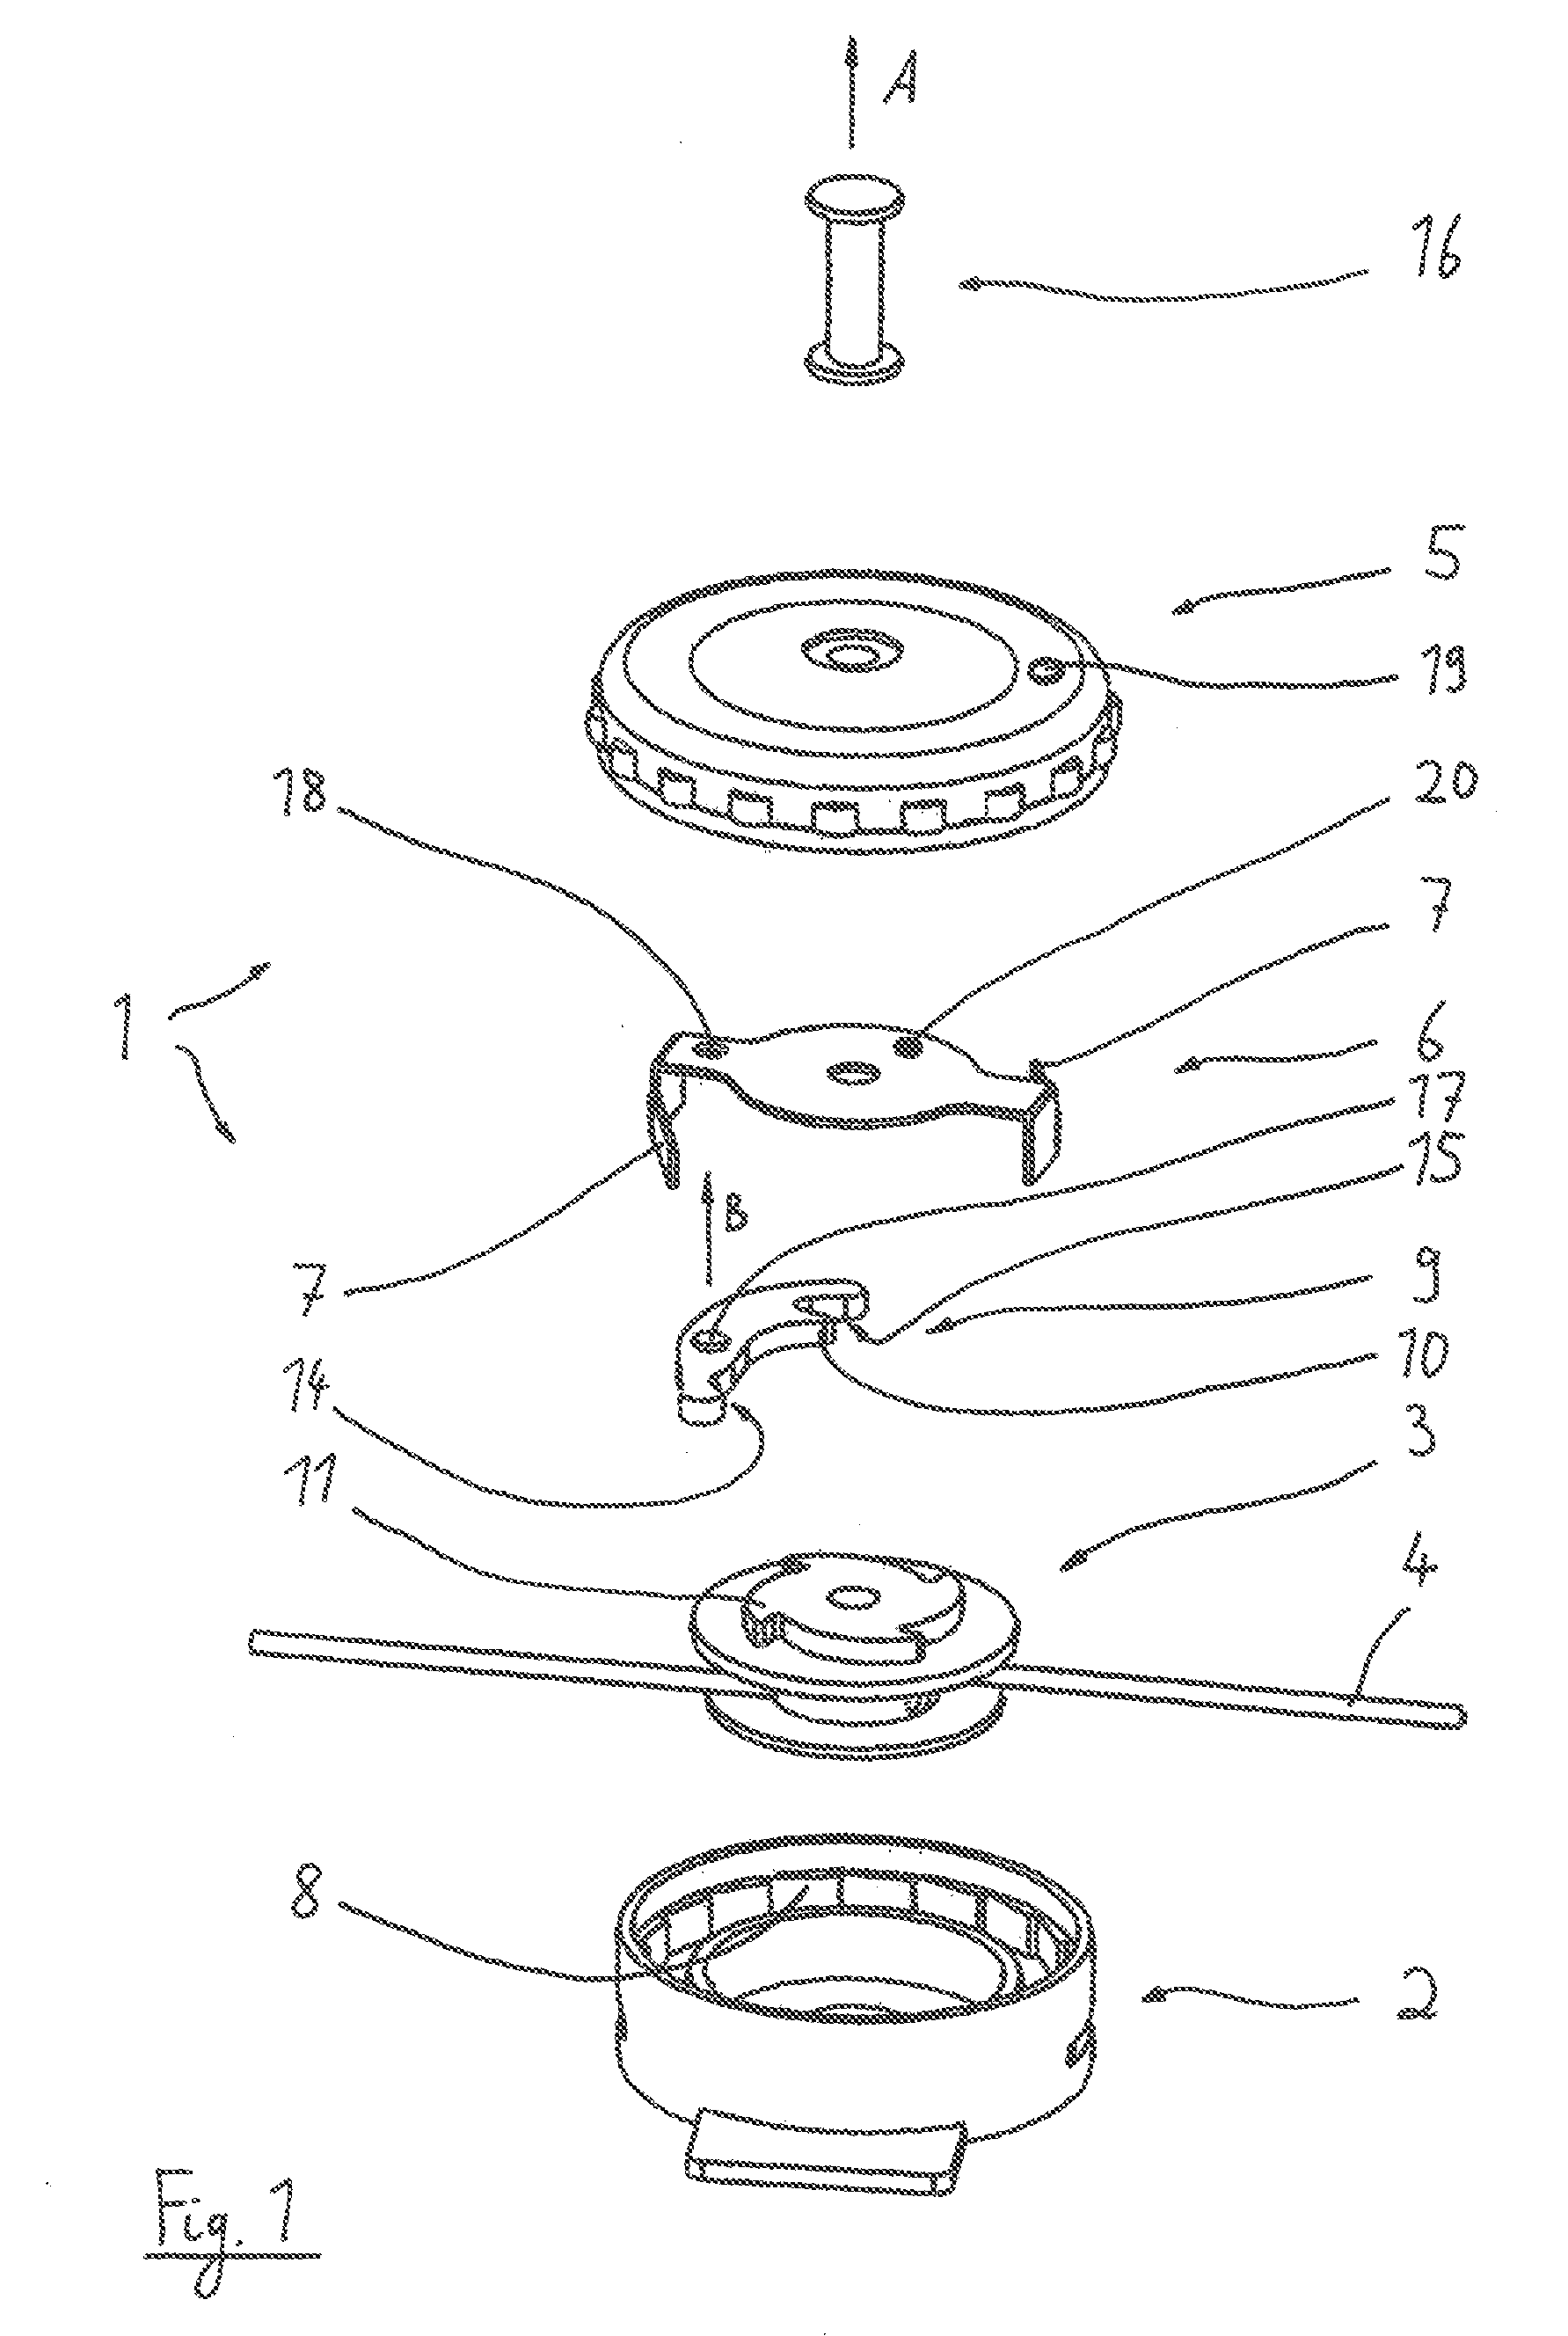 Rotary closure for a shoe